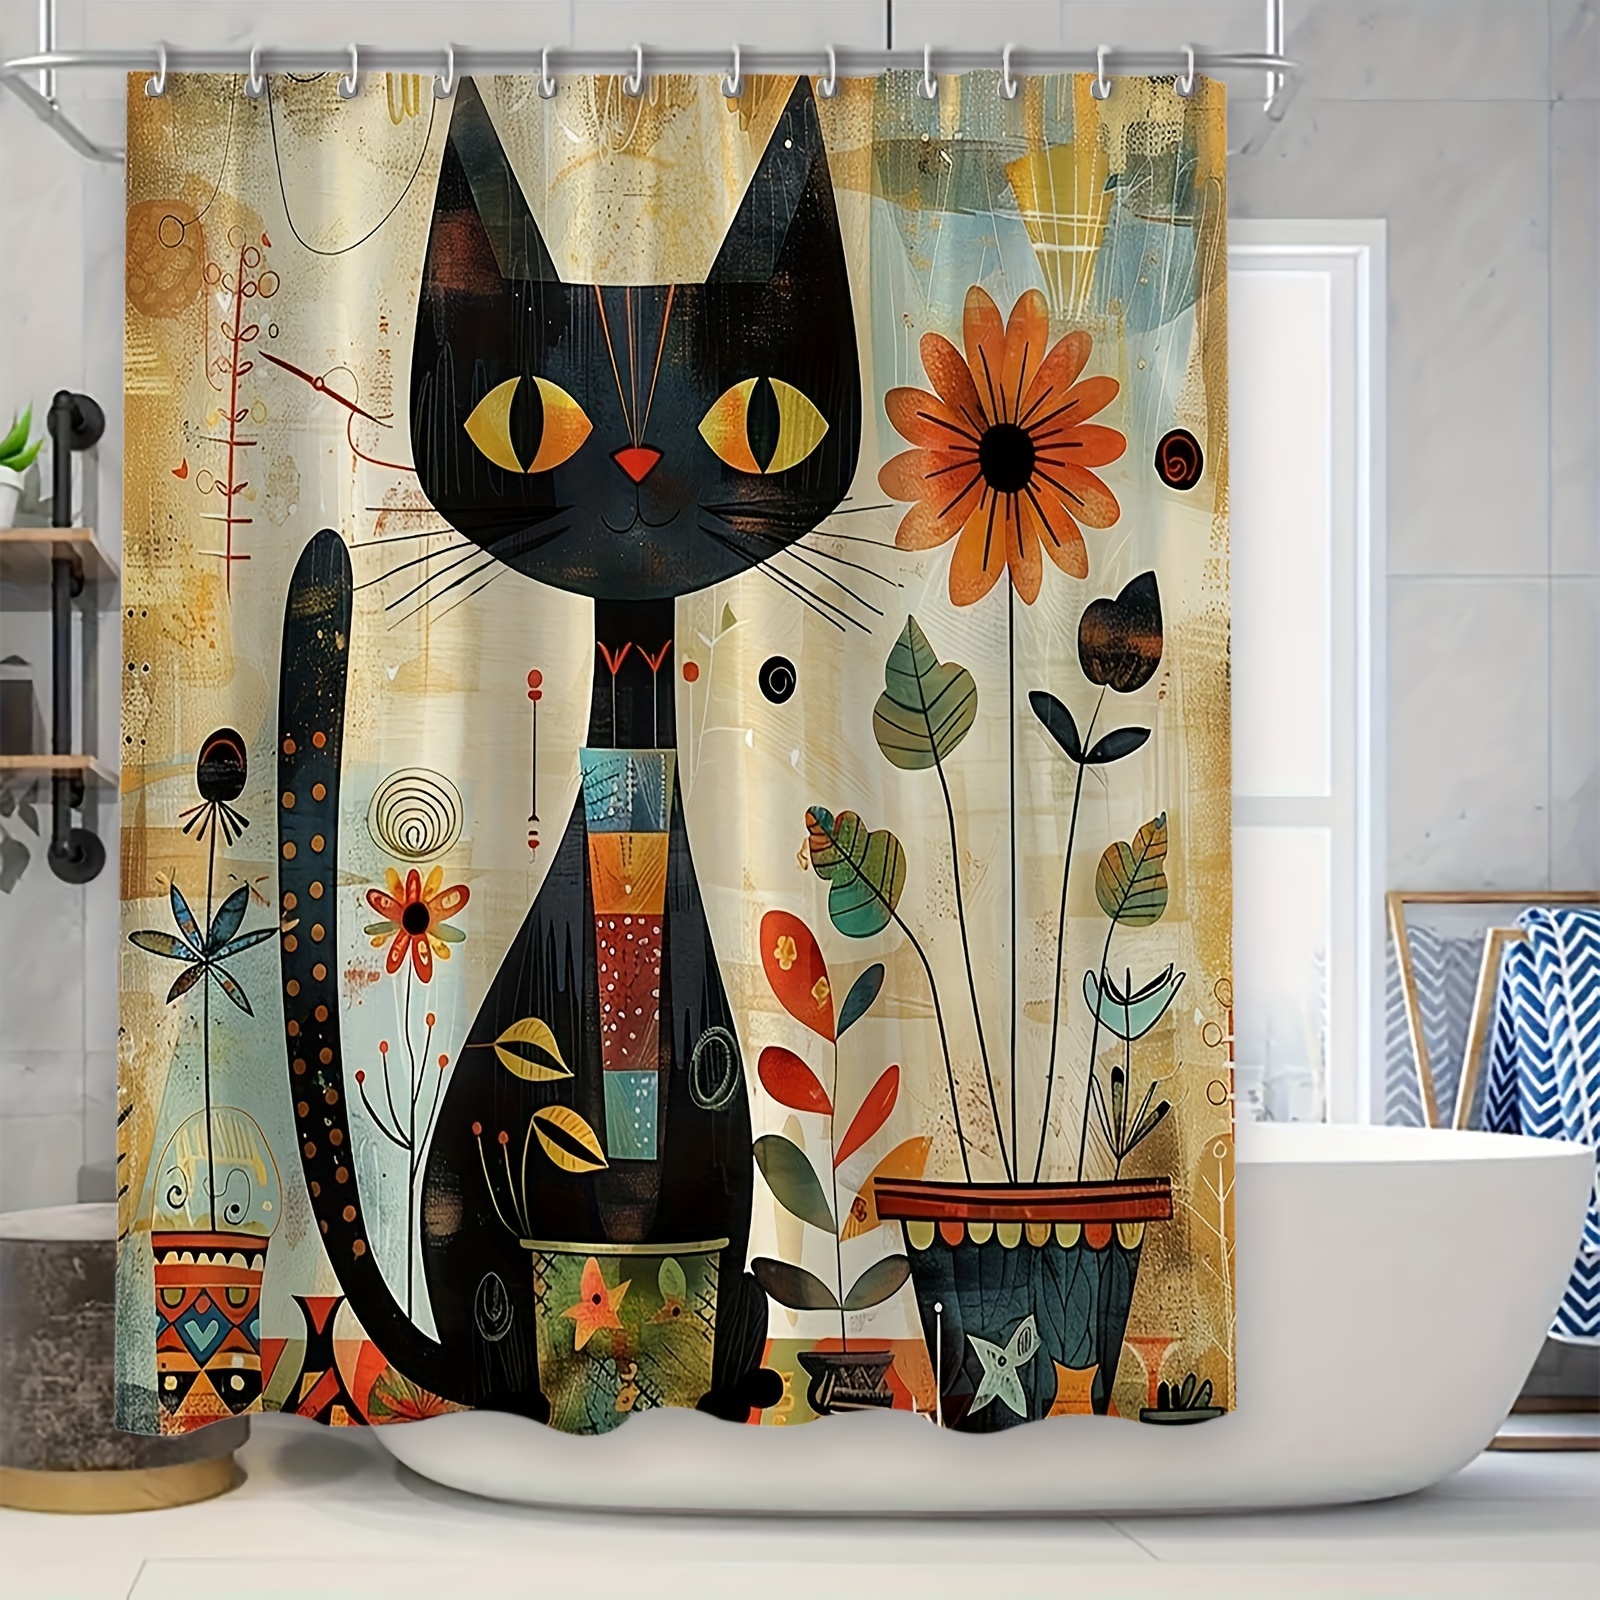 

easy-care" Chic Vintage Cat & Floral Waterproof Shower Curtain Set With 12 Hooks - Machine Washable, Polyester Bathroom Decor, 70.8"x70.8